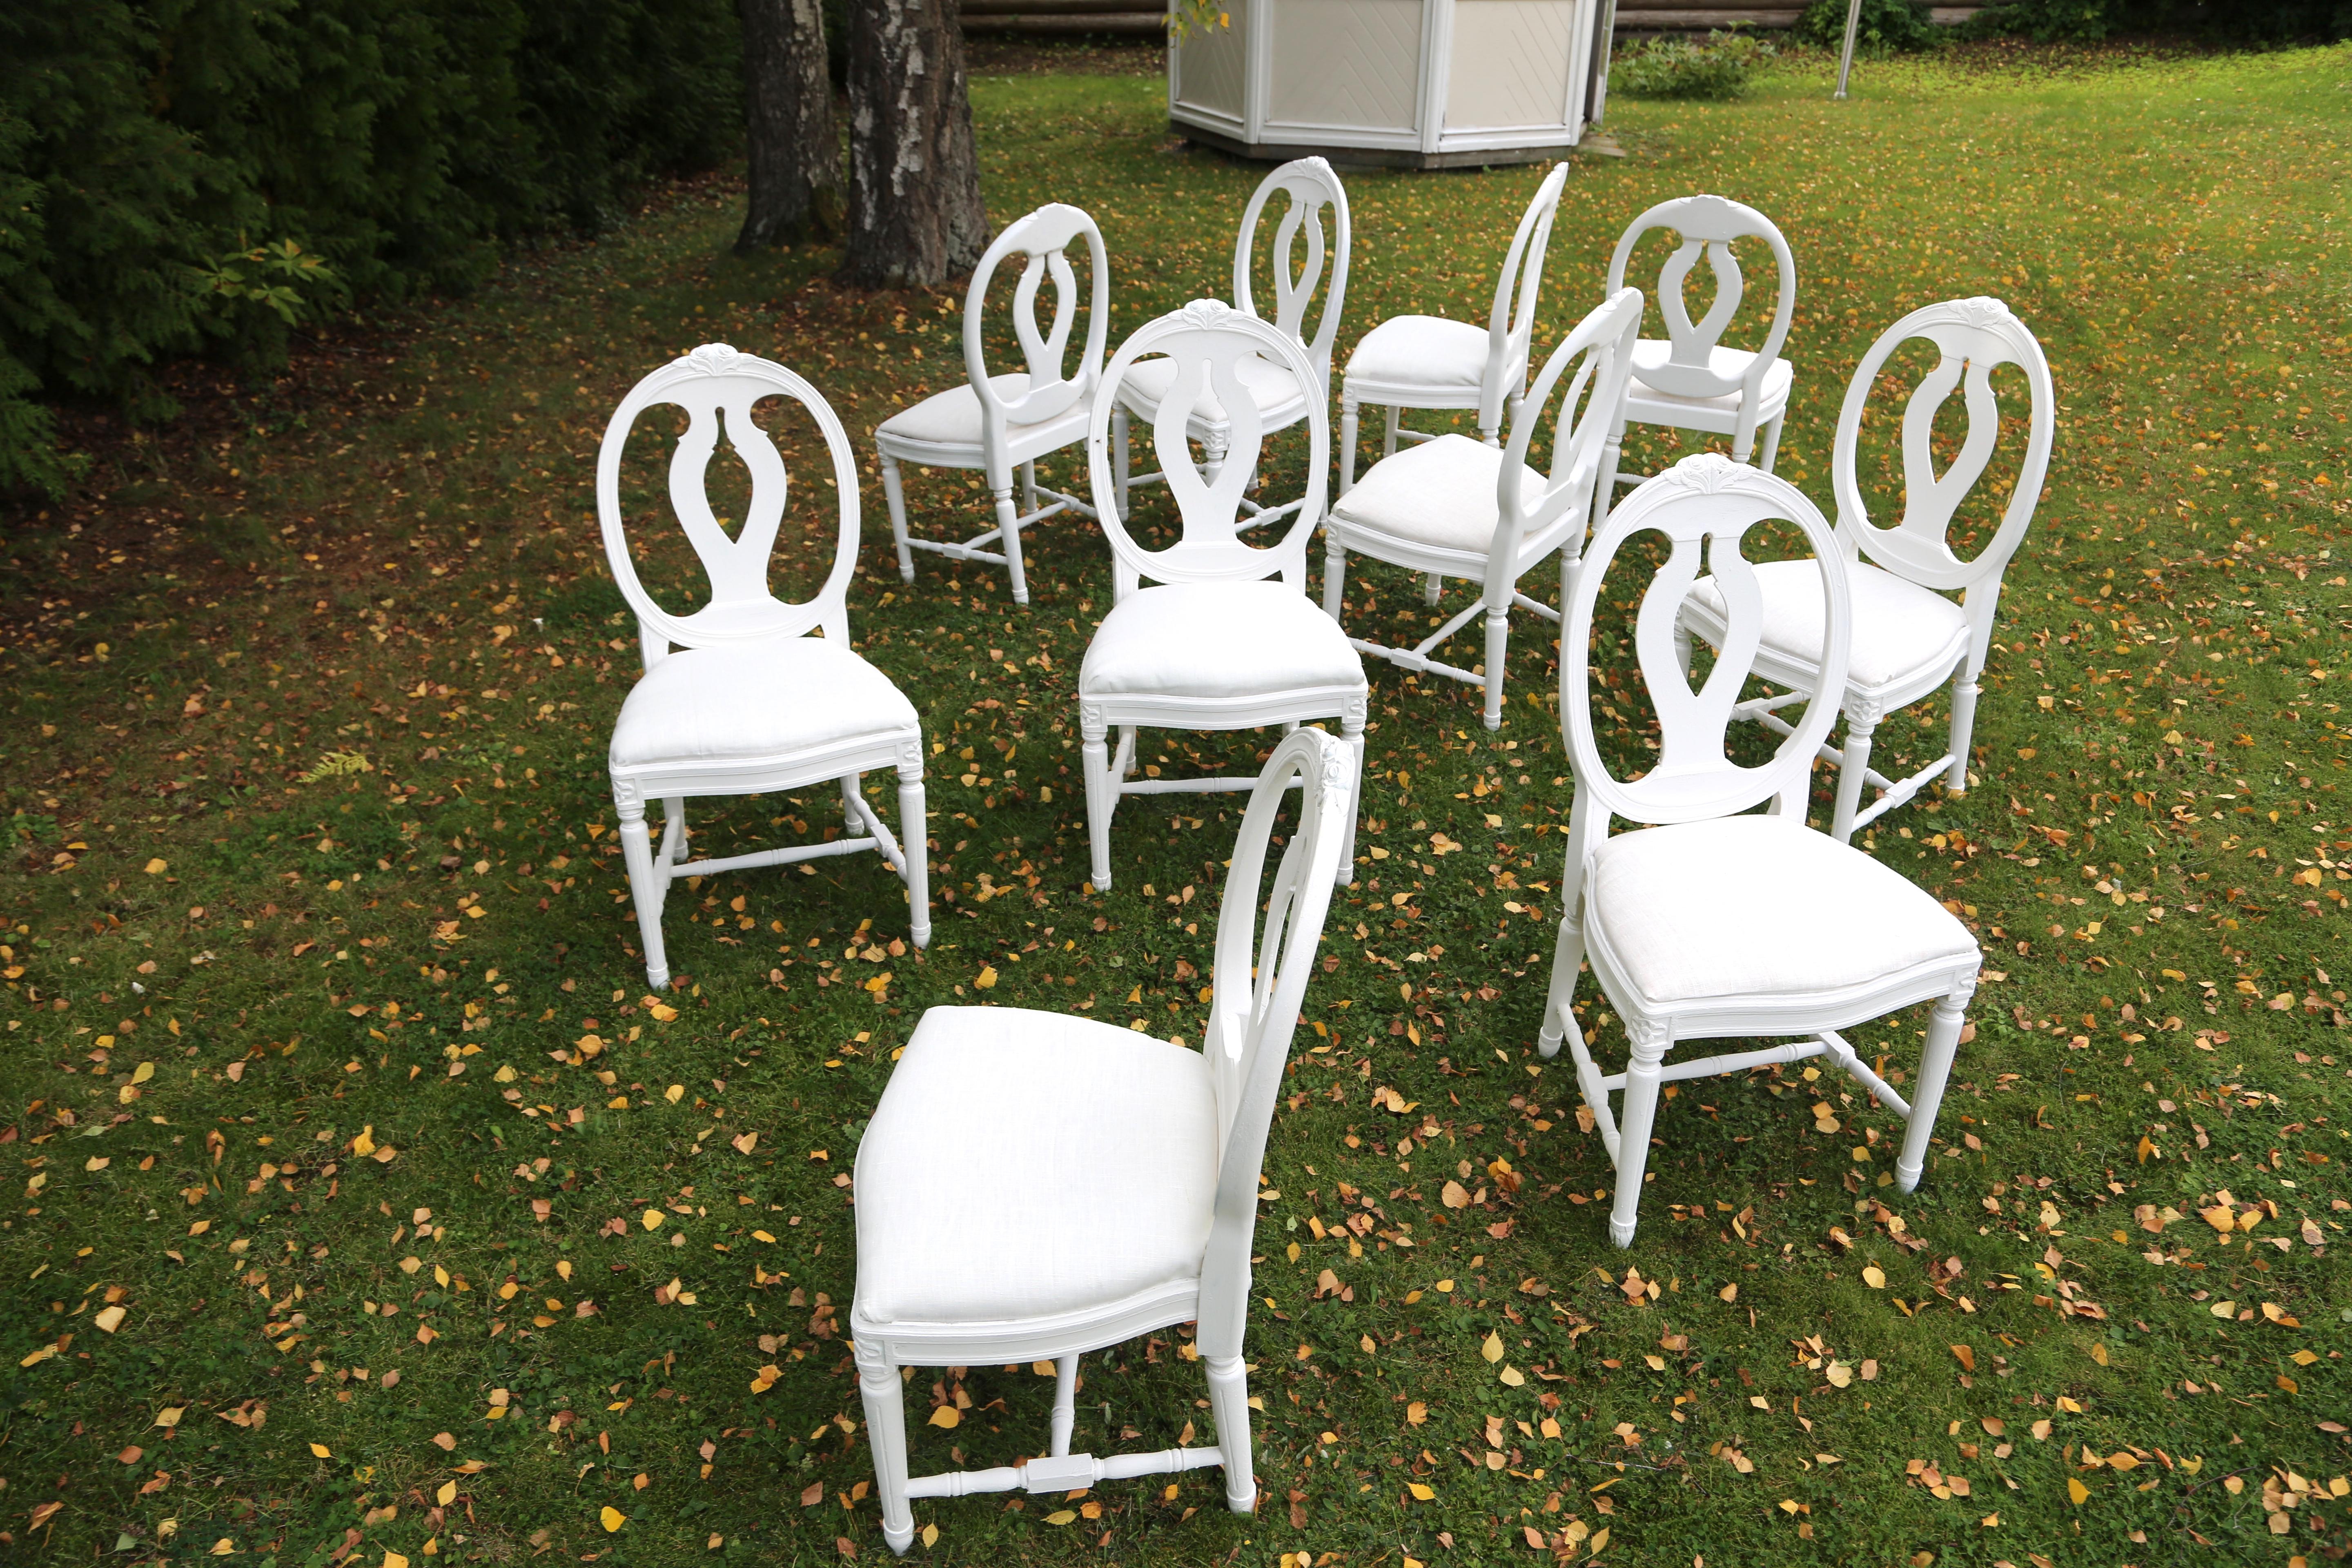 Set of sixteen Swedish Gustavian style dining chairs with oval backs circa 1900 in white paint.The modell is call Svenska modellenin. Oval pierced backs, fluted legs and new upholstery.

Measures: H 94cm, W 49.37cm, D 43cm, seat height 47cm.